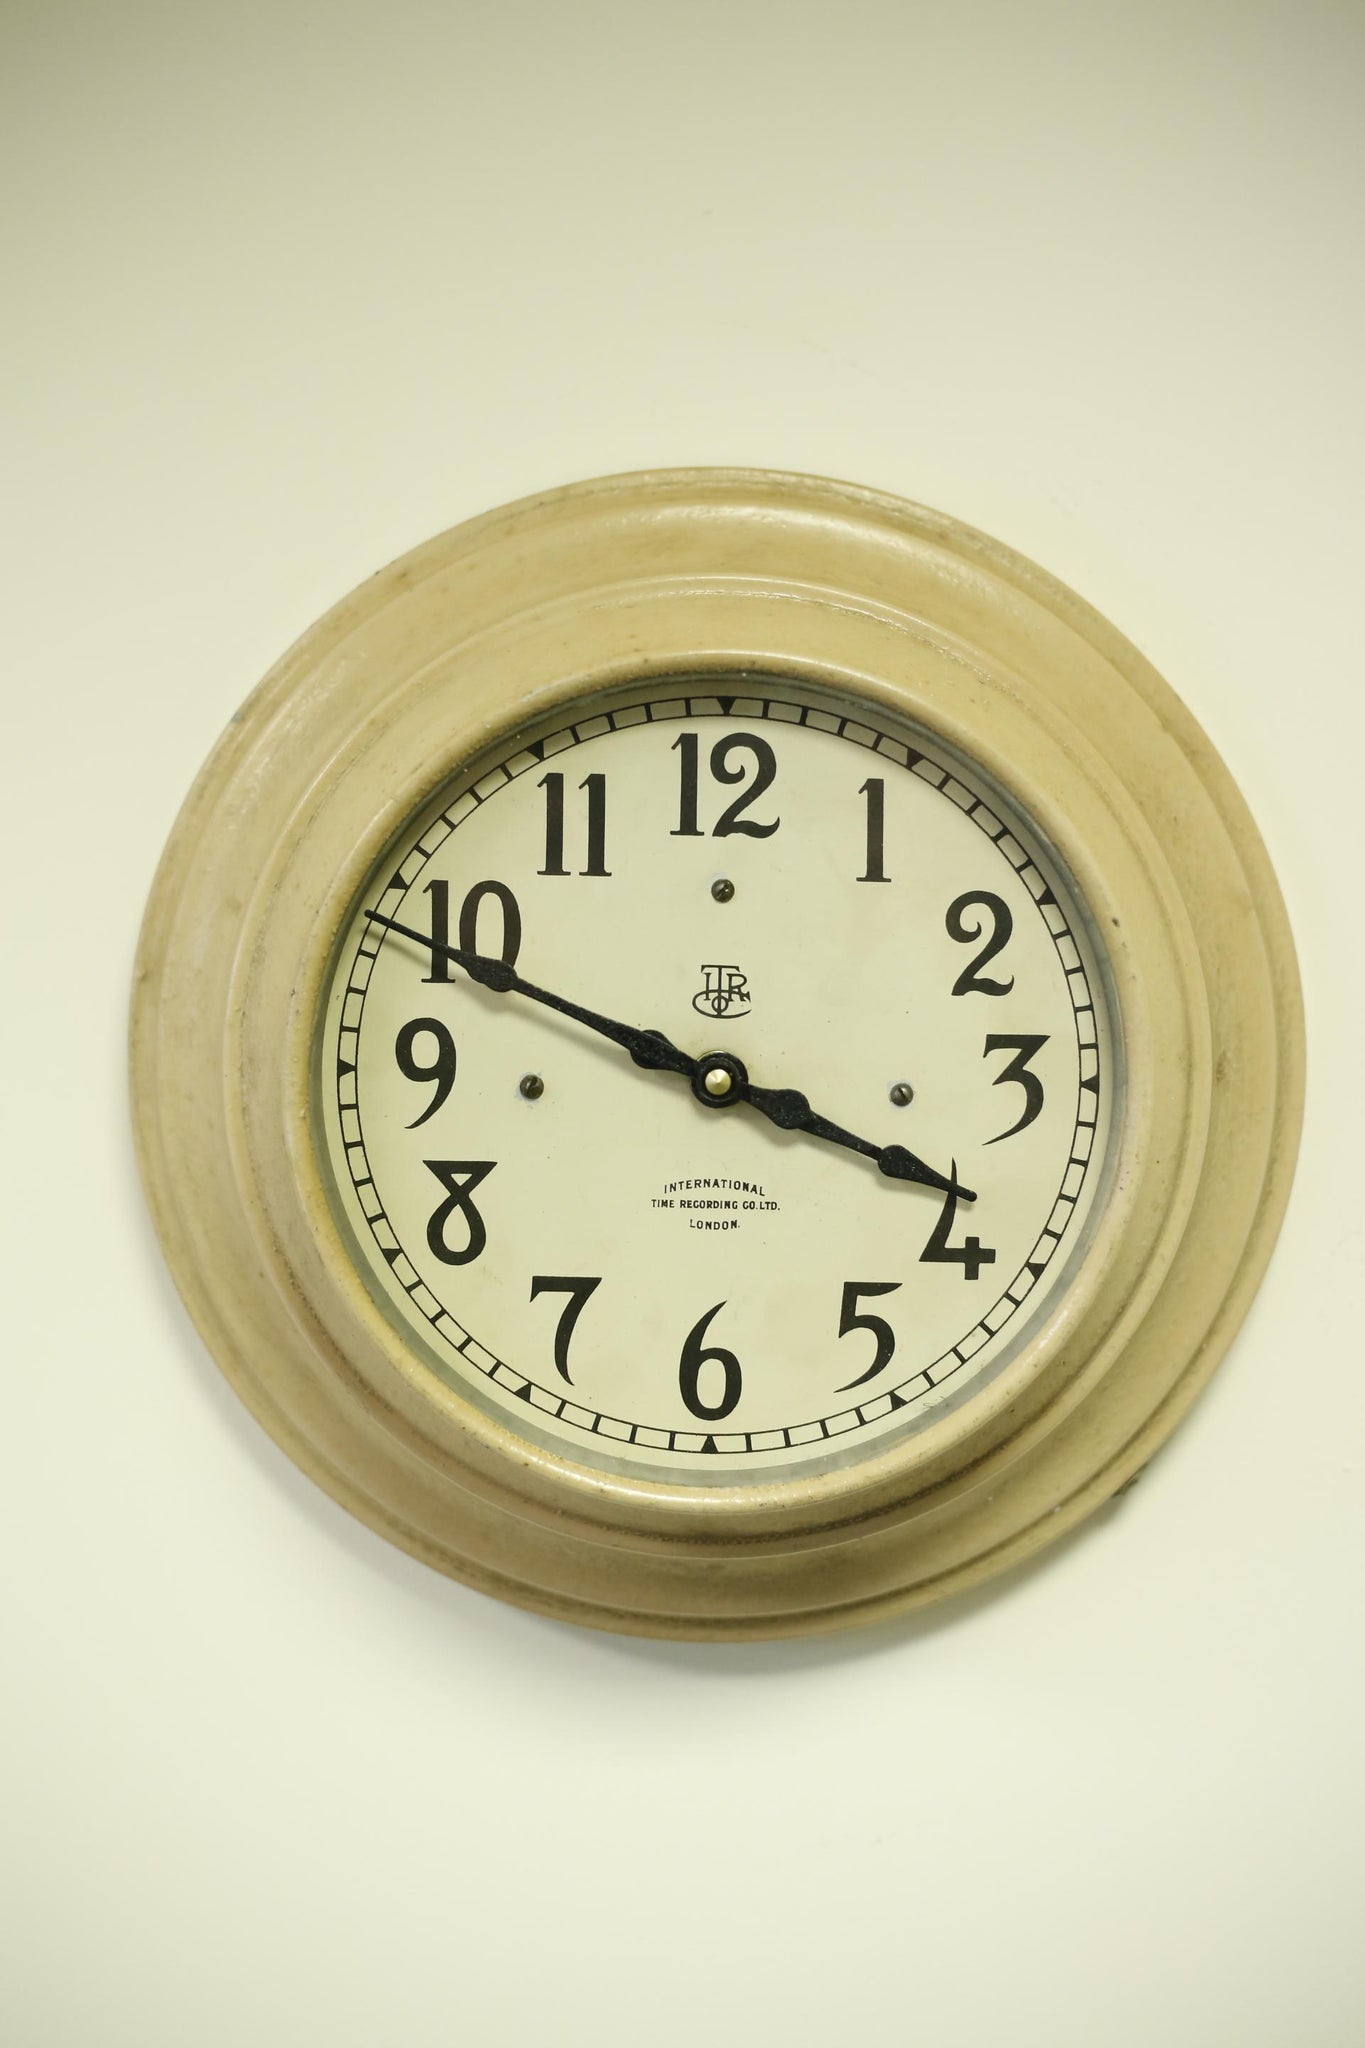 1940's International time recording co wall clock